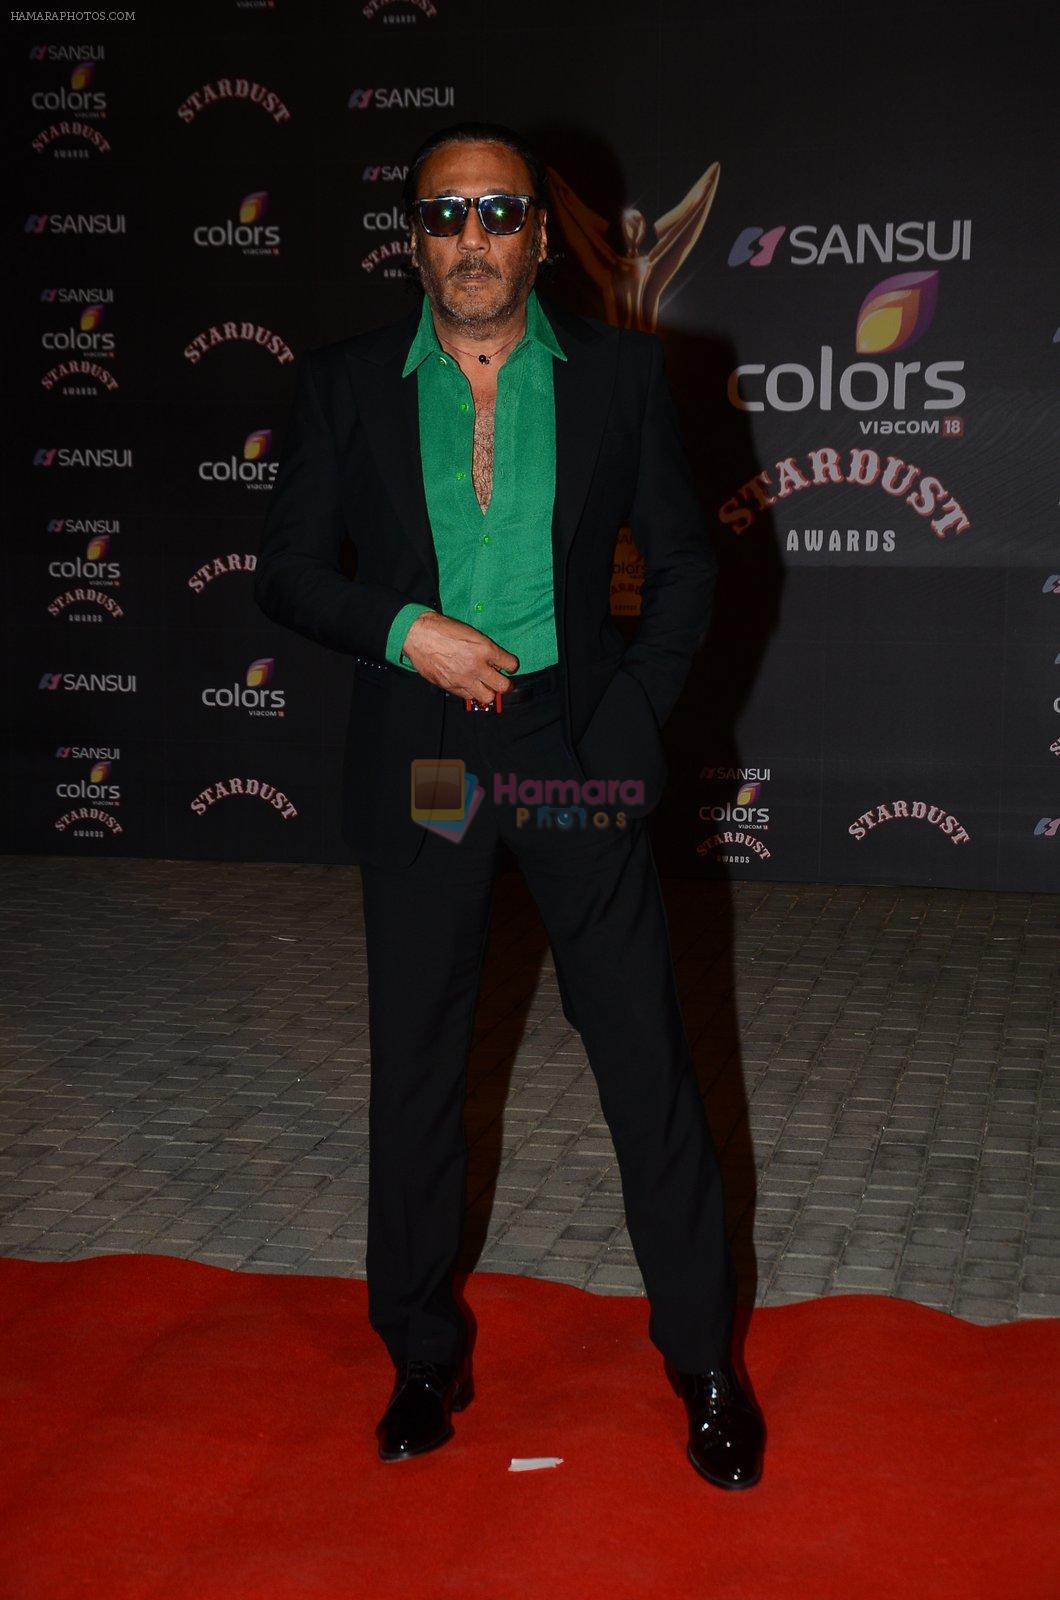 Jackie Shroff at the red carpet of Stardust awards on 21st Dec 2015